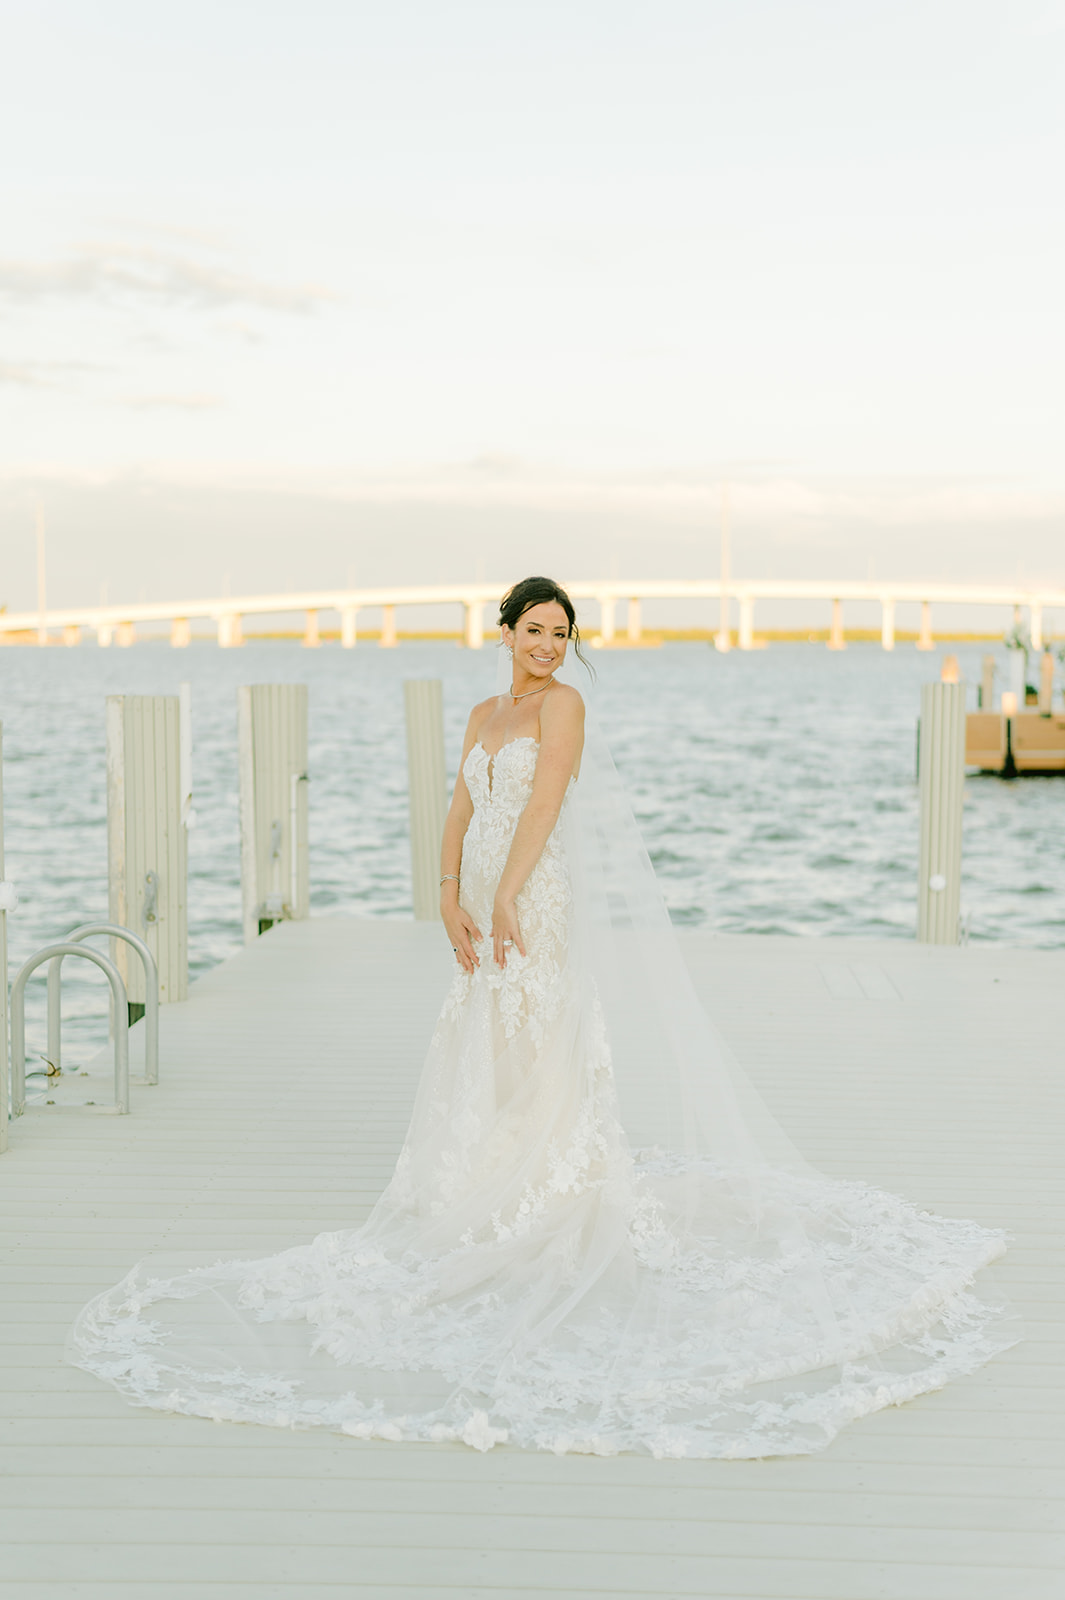 Naples Florida Fine Art Wedding Photographer - A Story Told in Images
